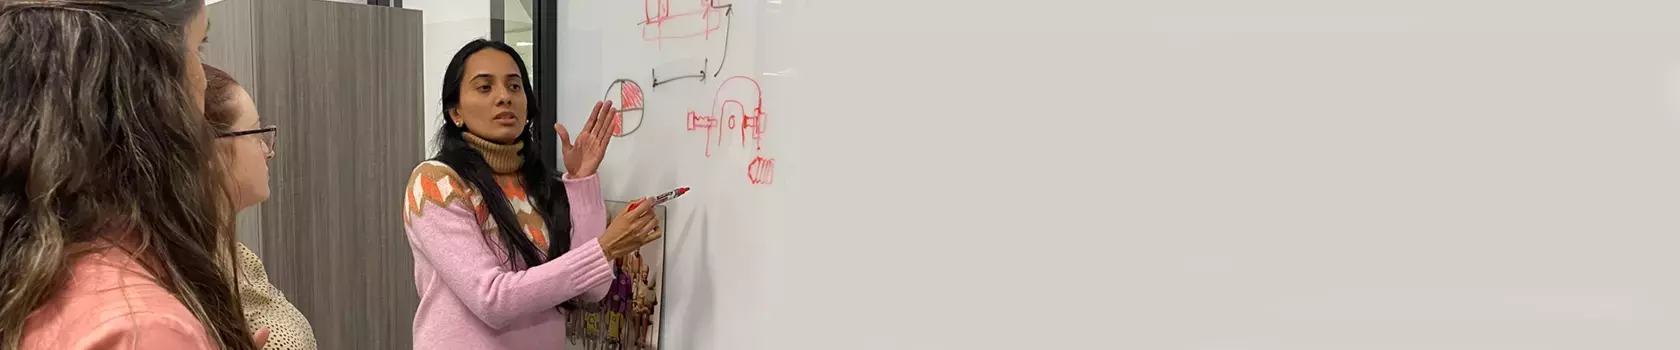 Group of women engineers at a whiteboard